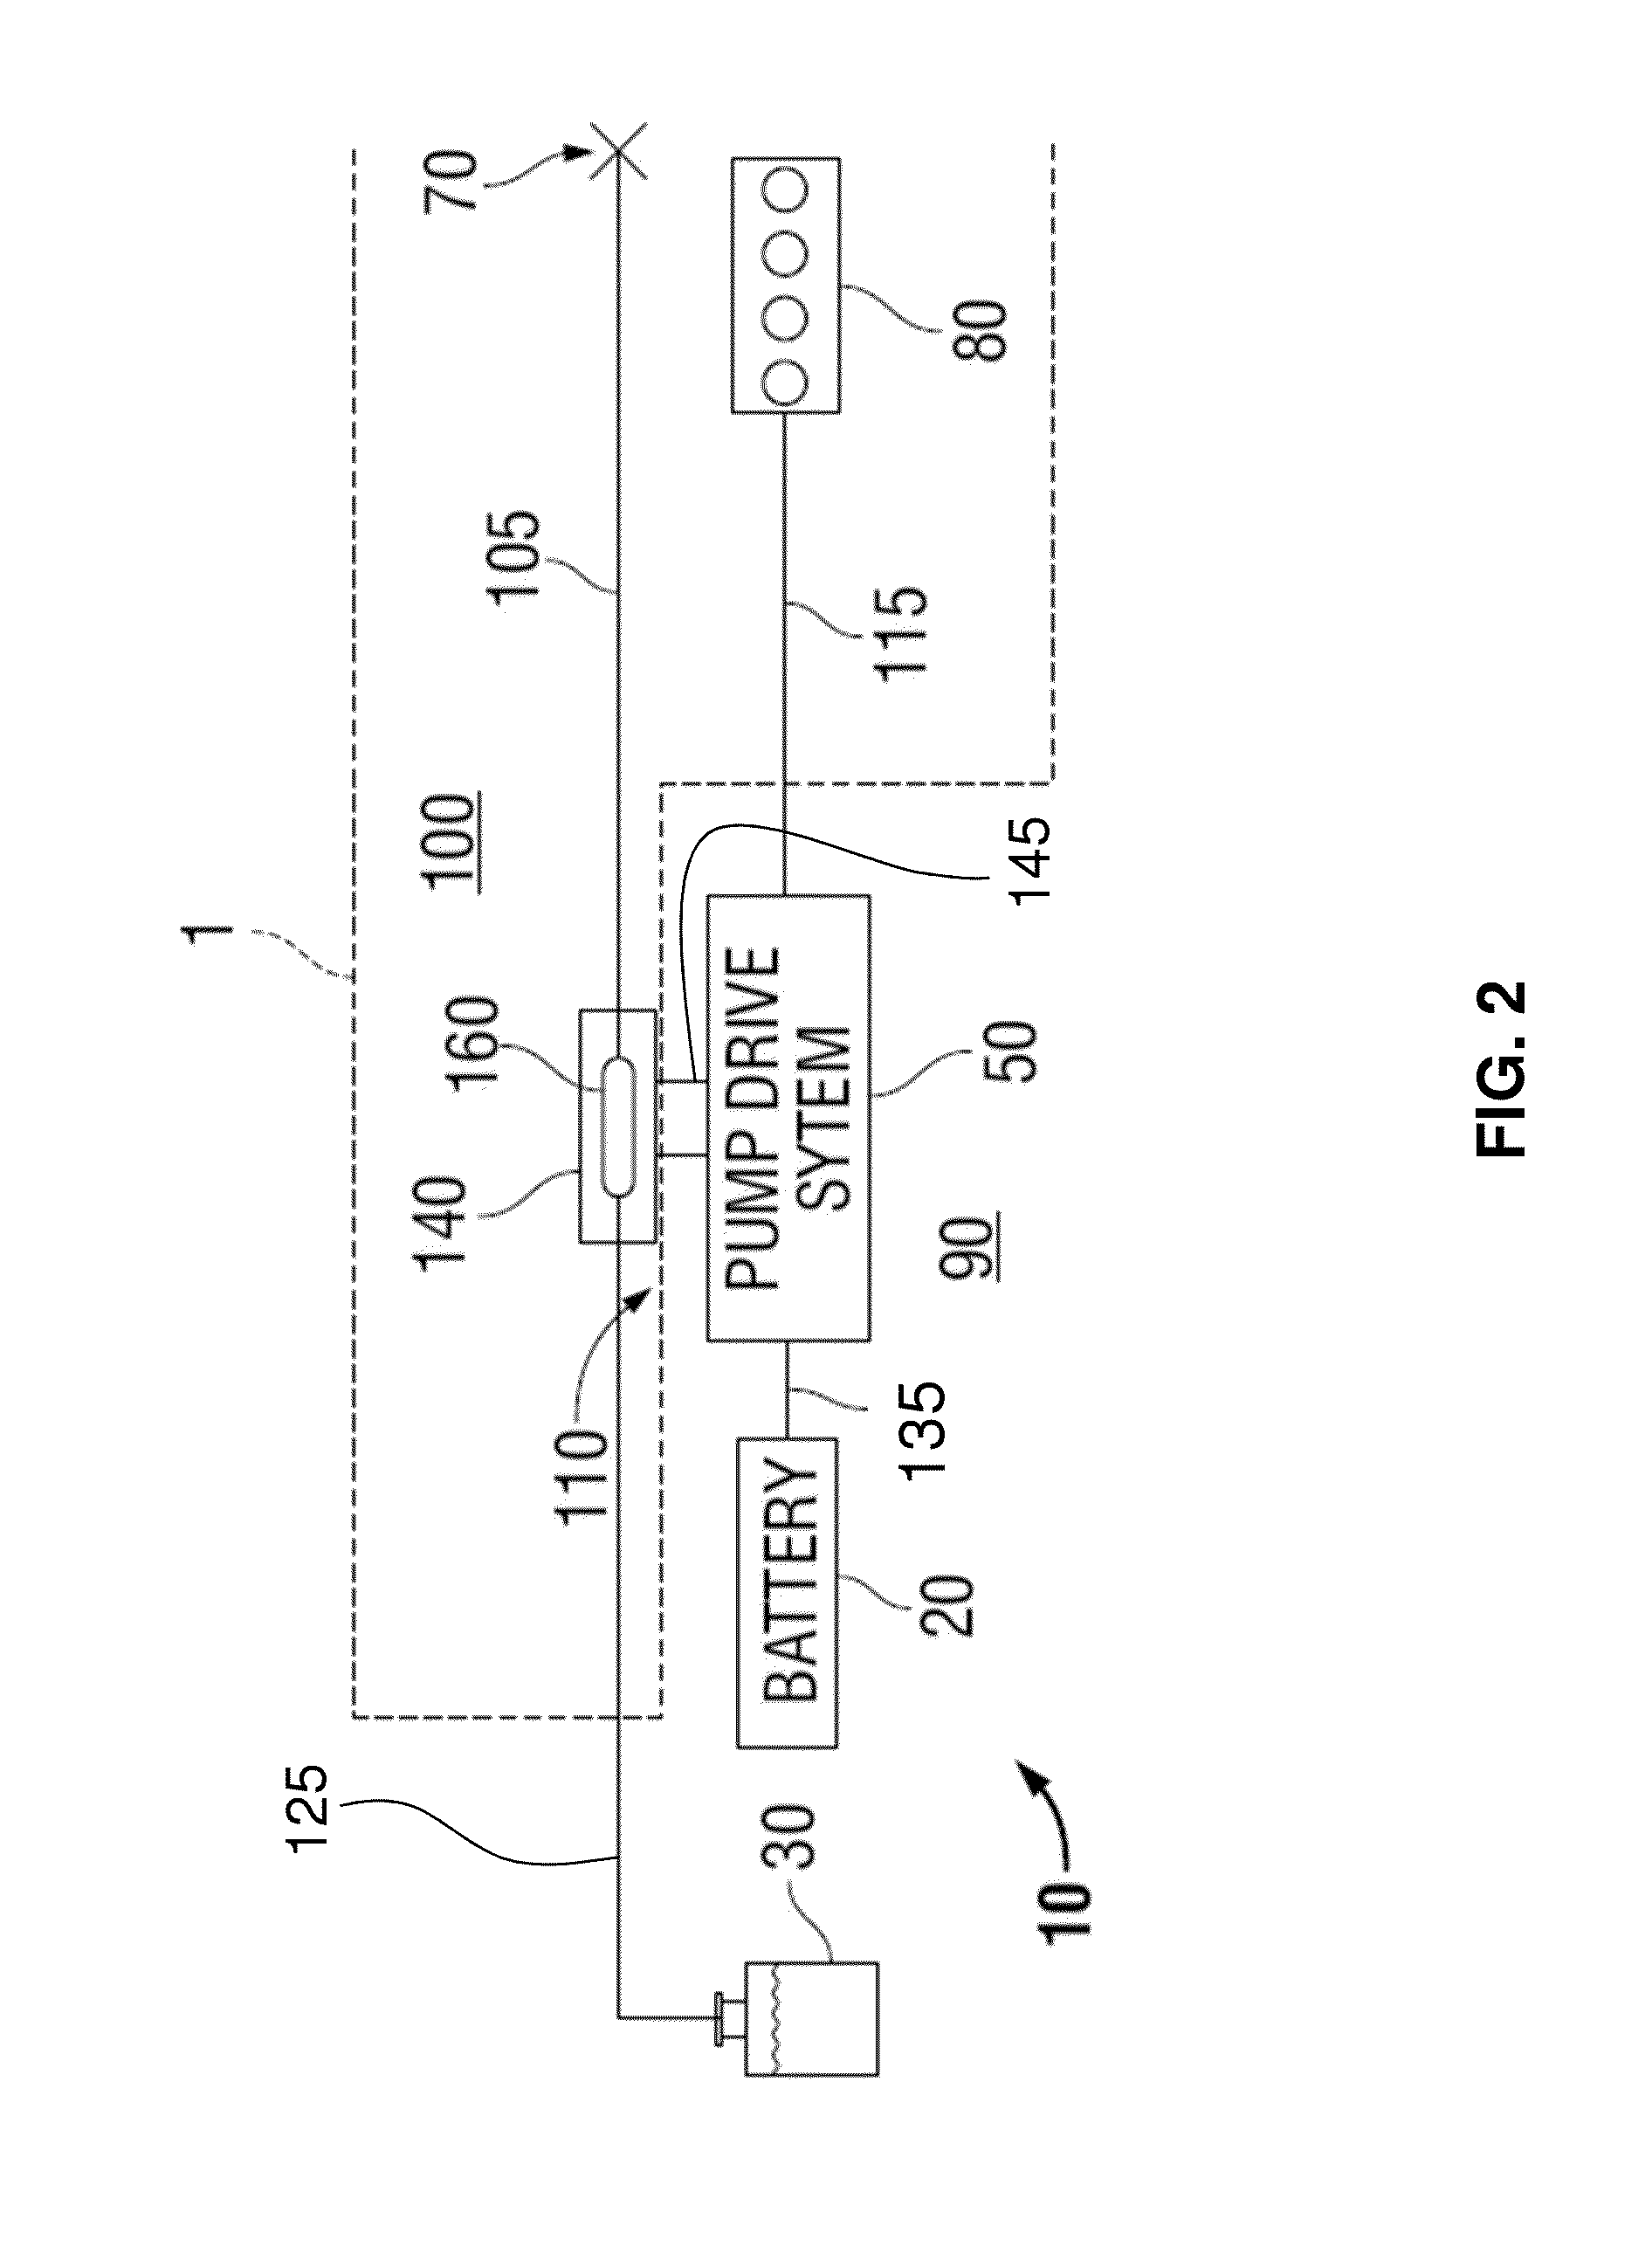 Integrated catheter and powered injector system for use in performing radial angiography